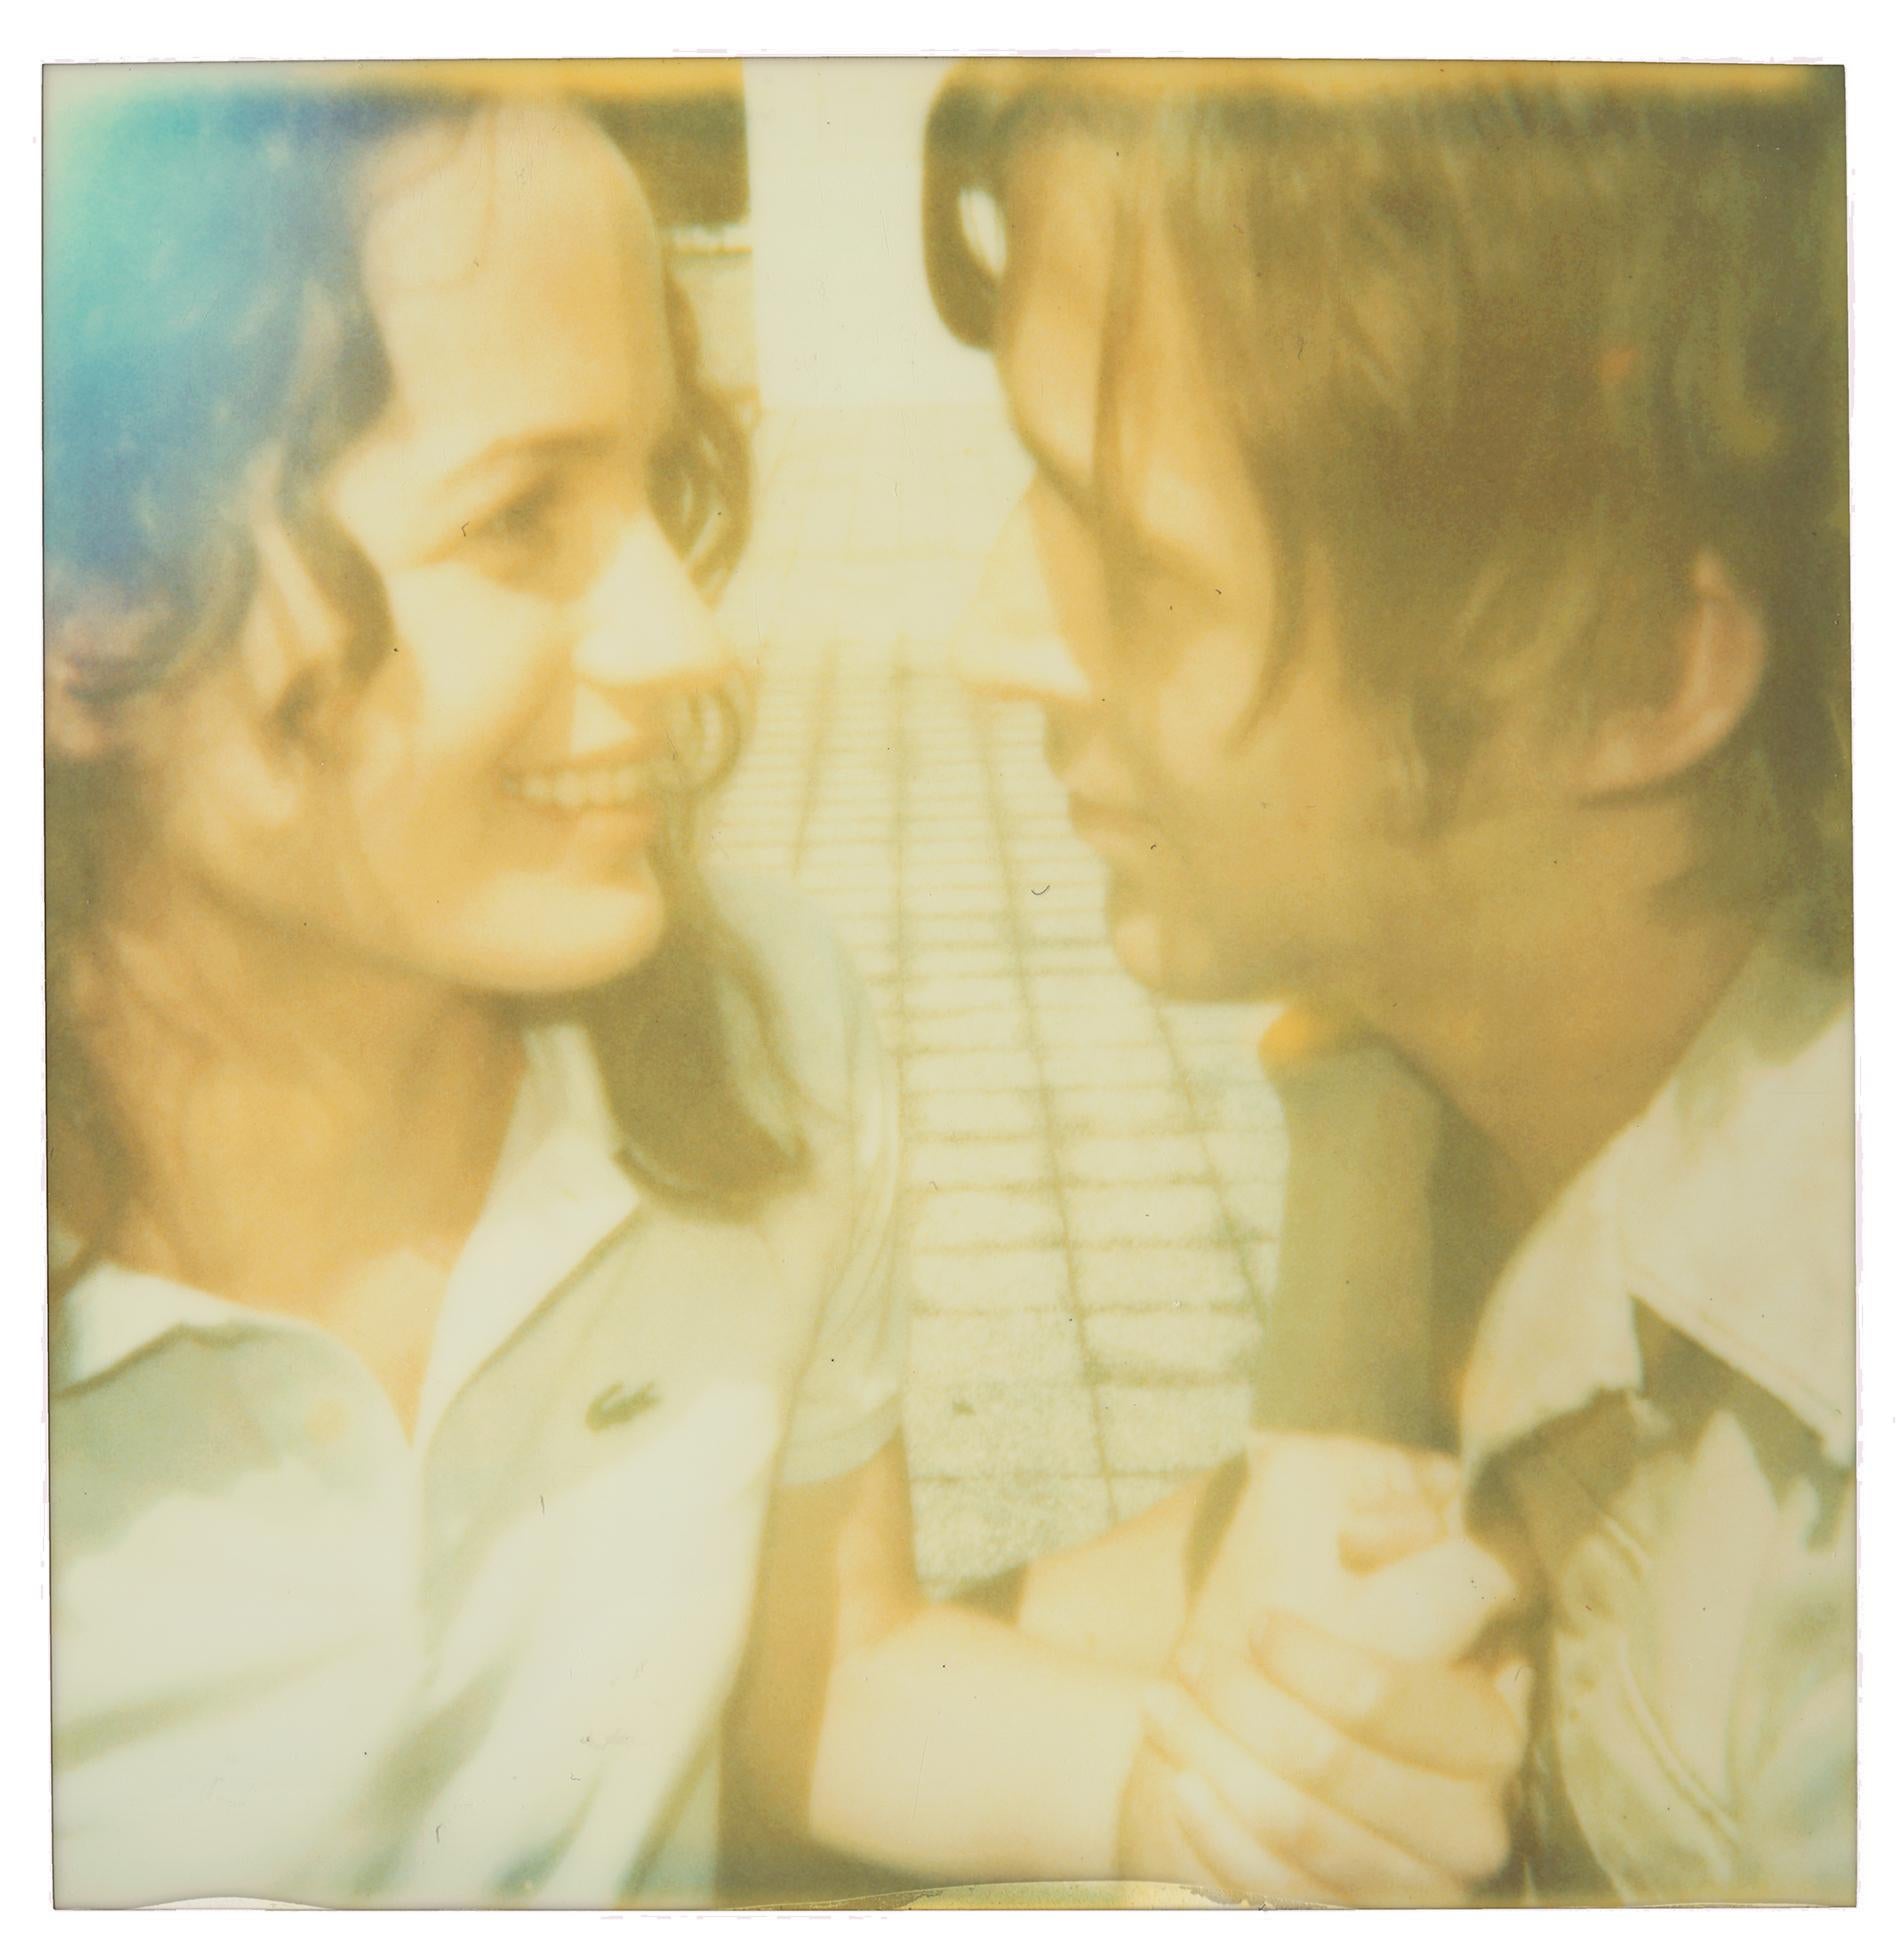 Stefanie Schneider Landscape Photograph - Athena and Henry (Stay) - featuring Ryan Gosling and Elizabeth Reaser